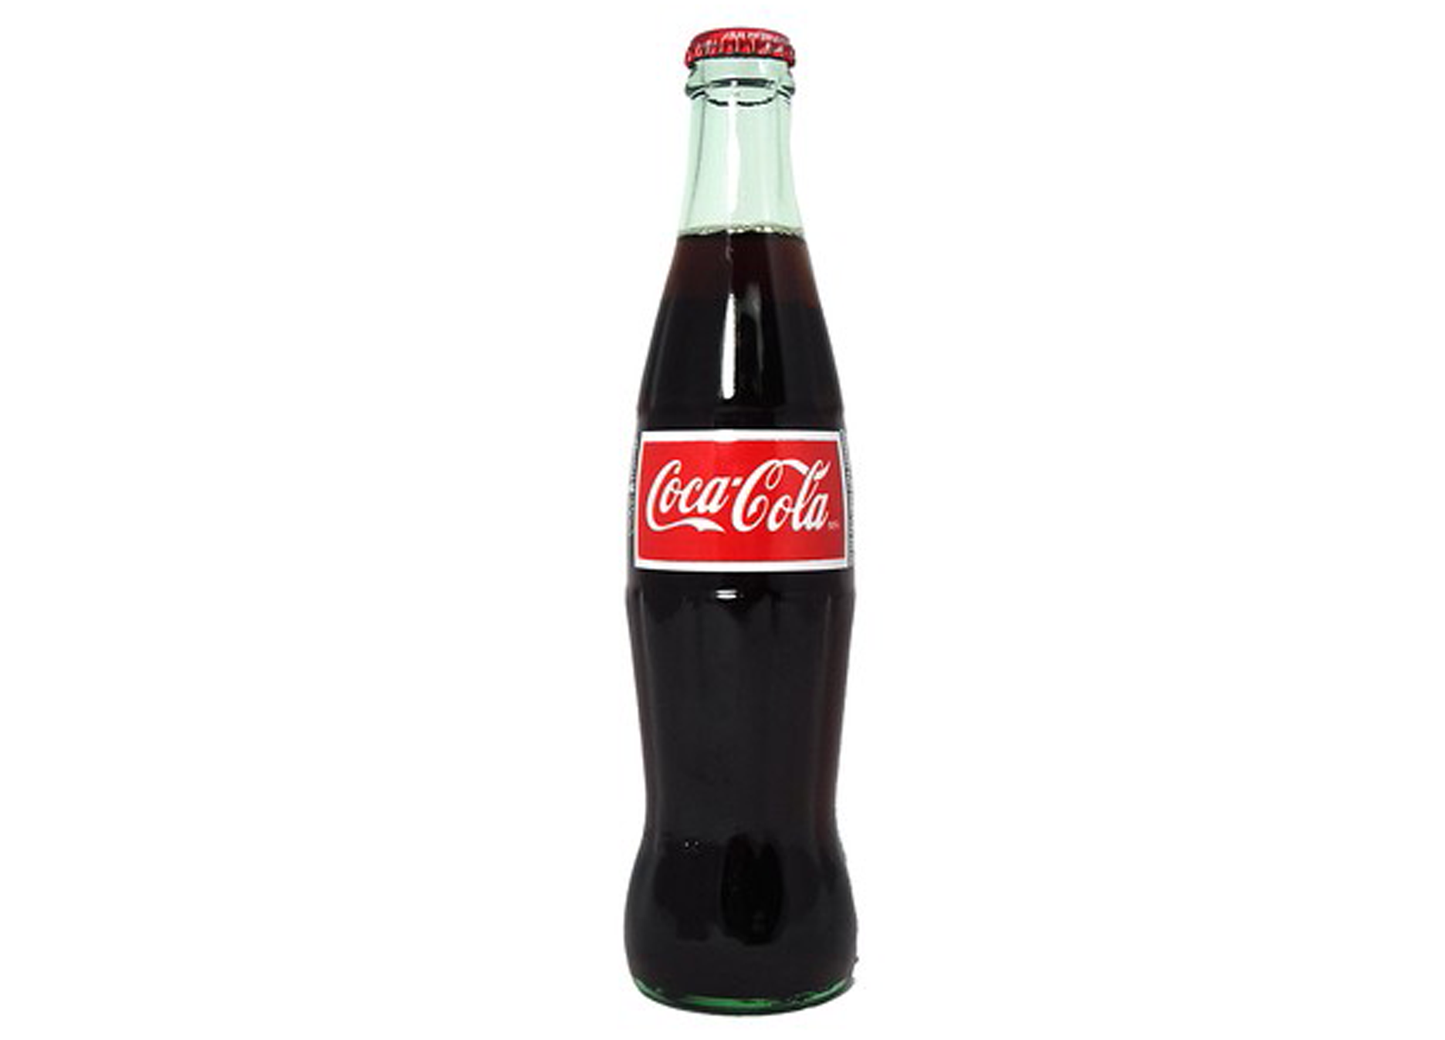 Mexican Coca-Cola, Coke. More sugar than the American Coke, this comes with a punch to your taste buds.